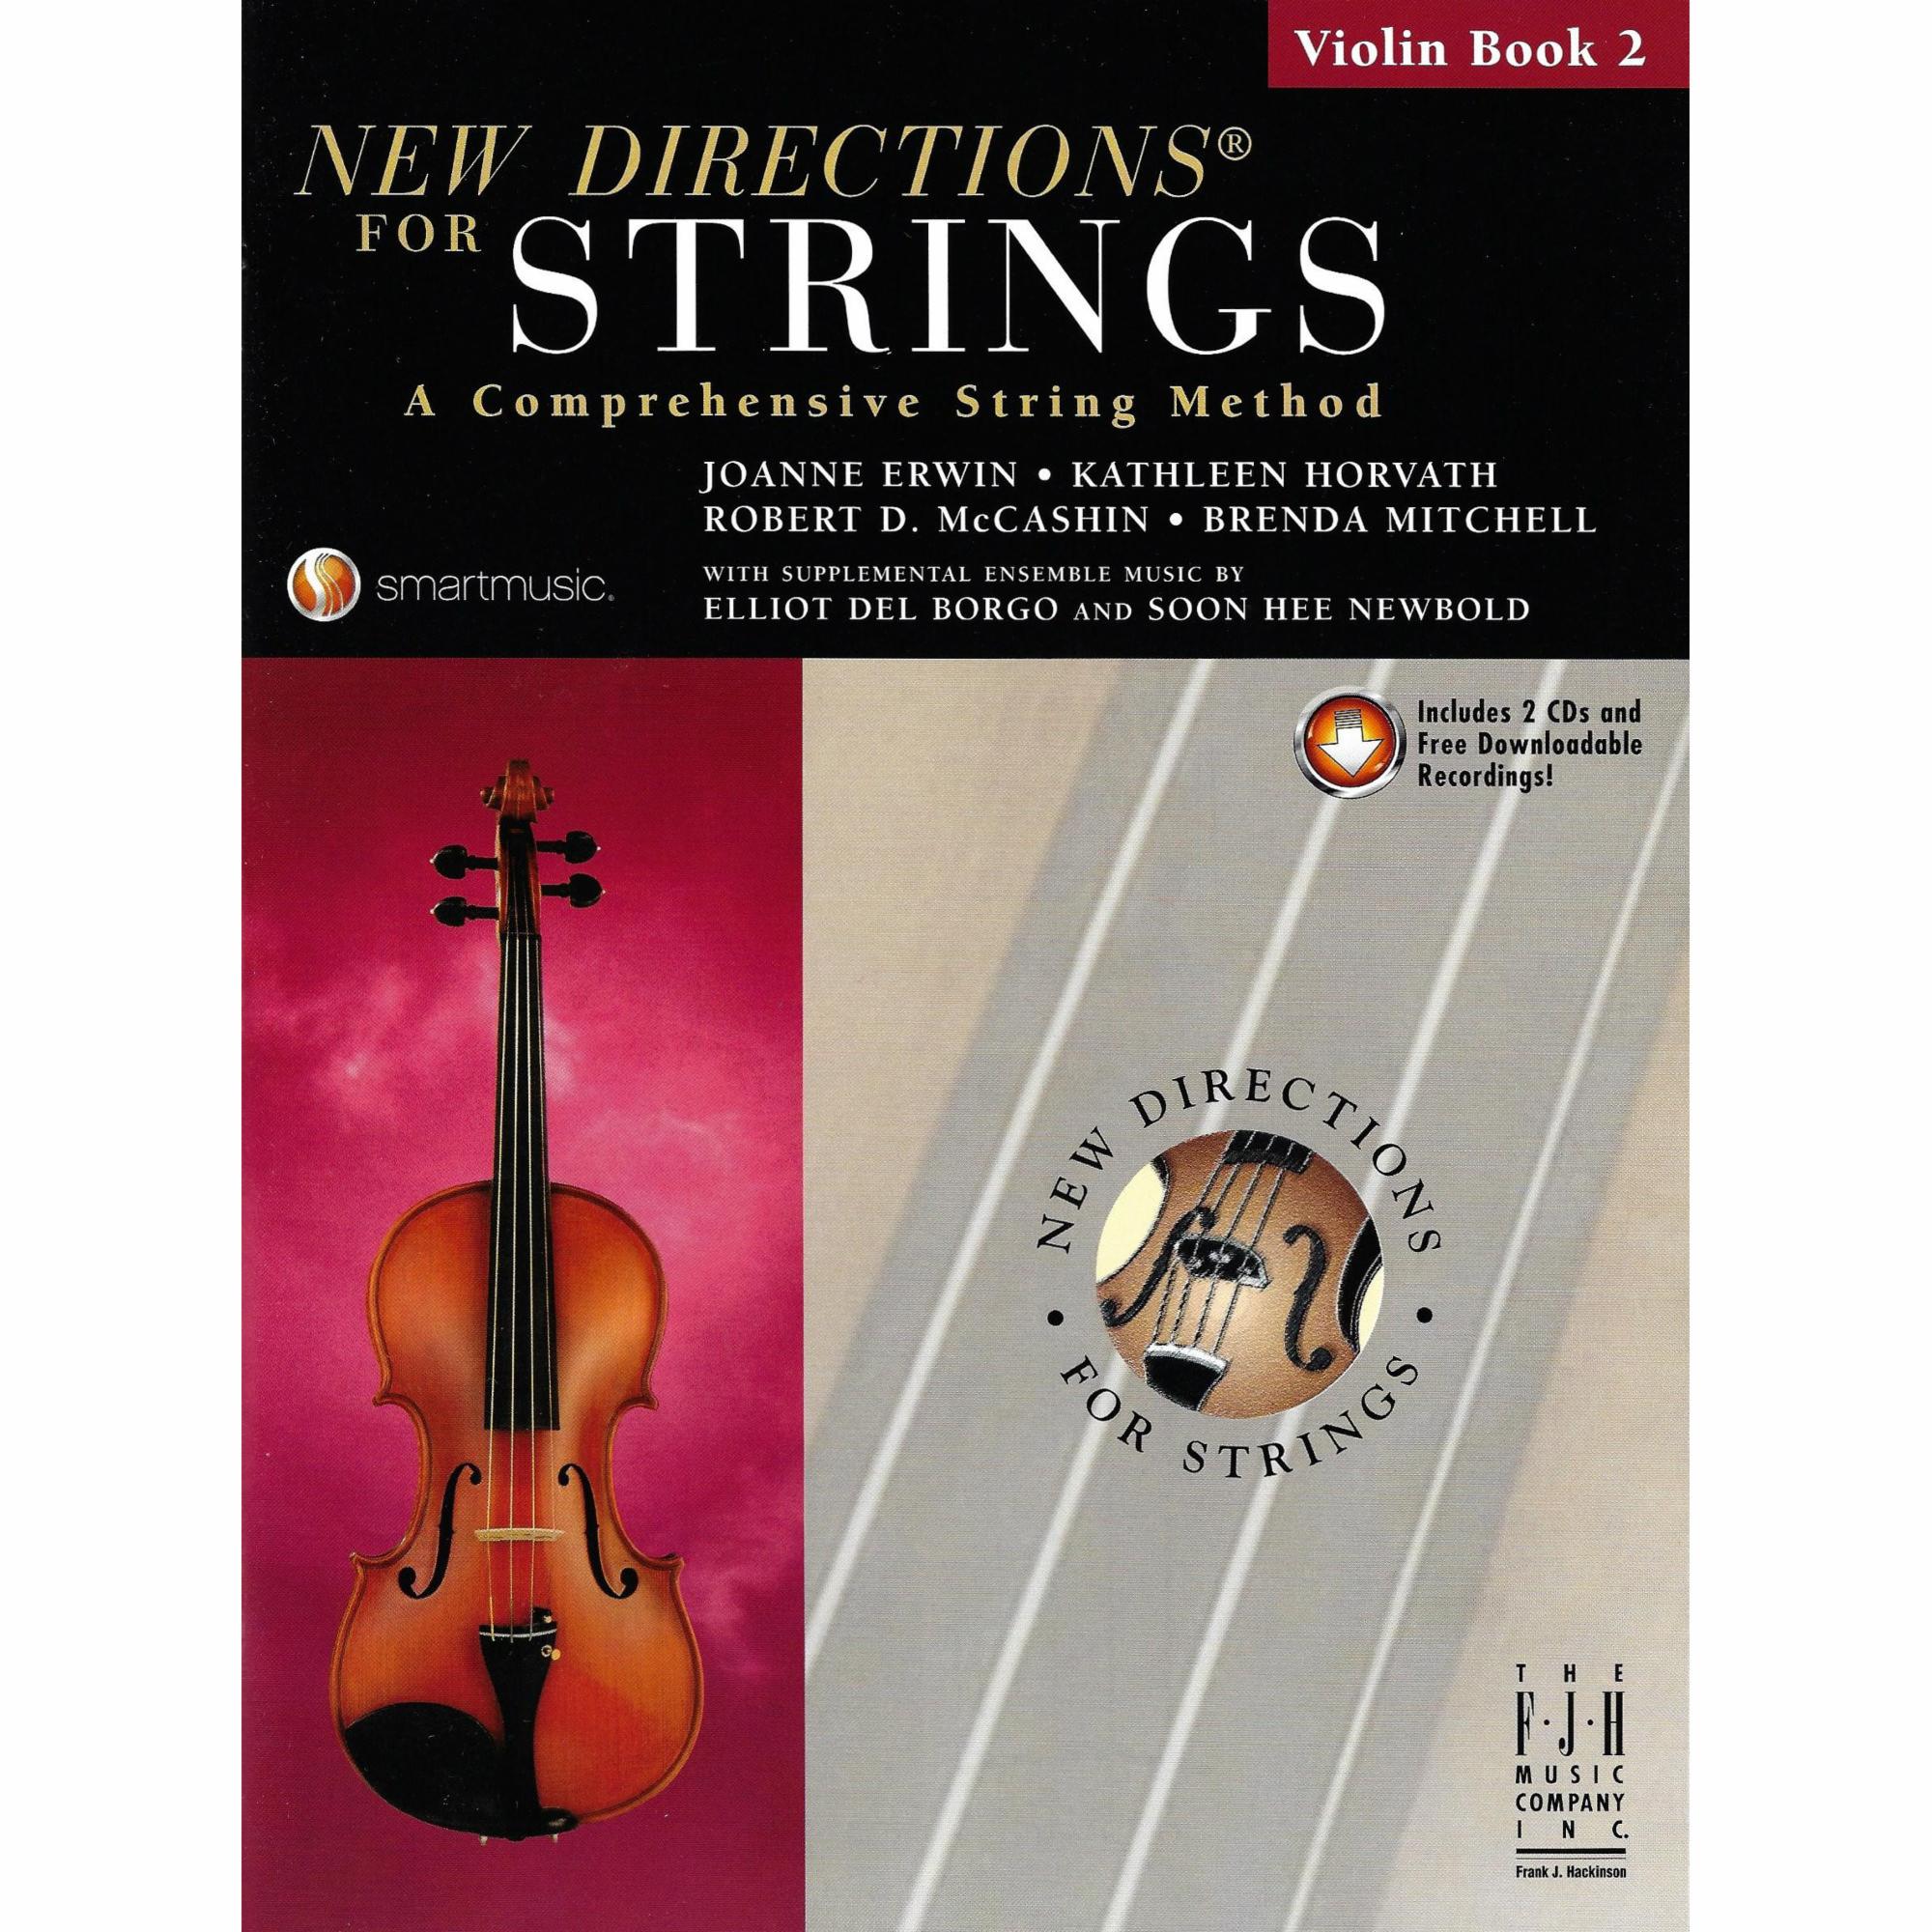 New Directions for Strings, Book 2